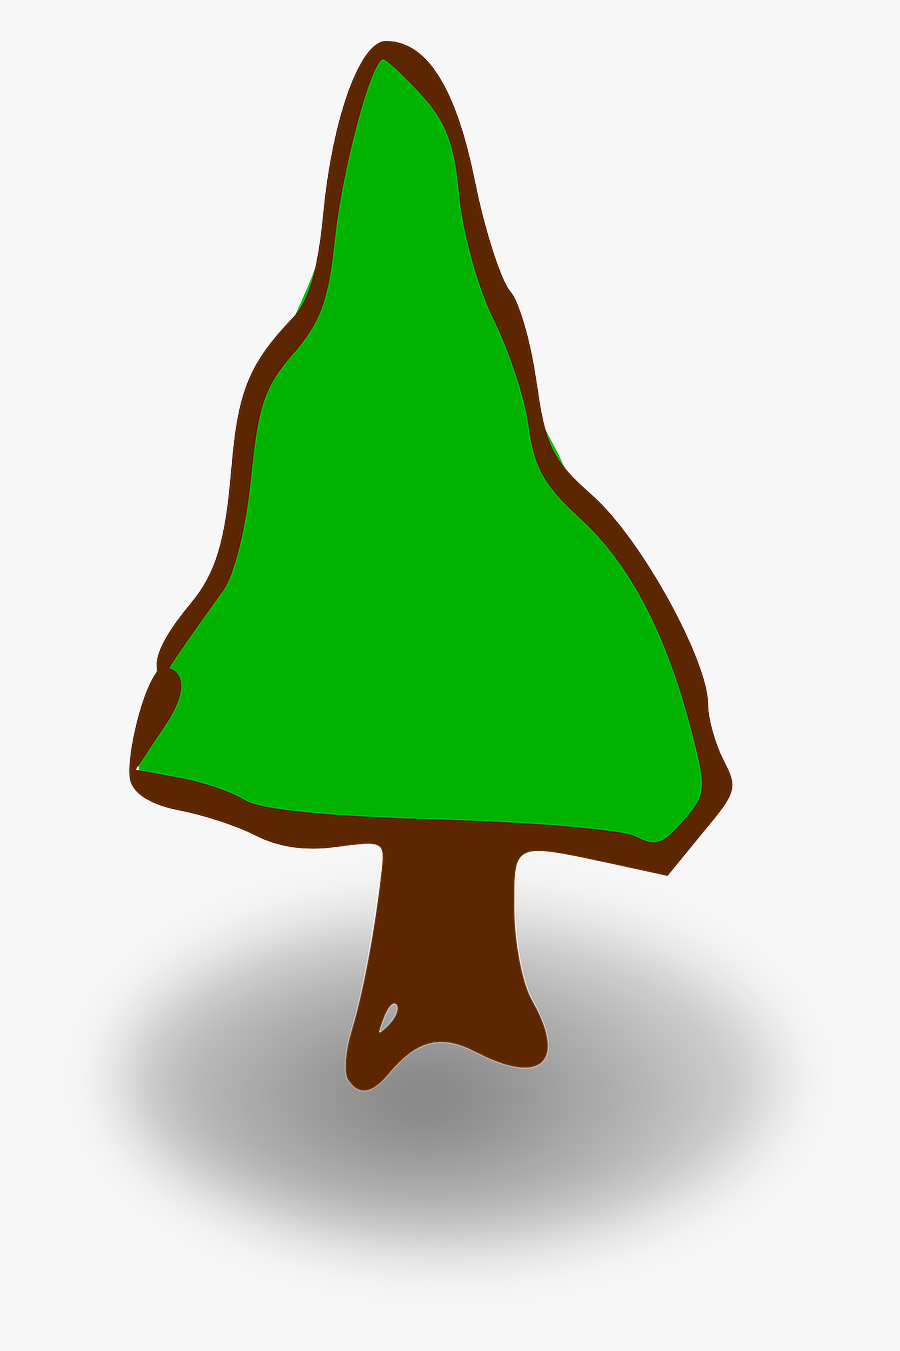 Cartoon Tree With Shadow Png, Transparent Clipart